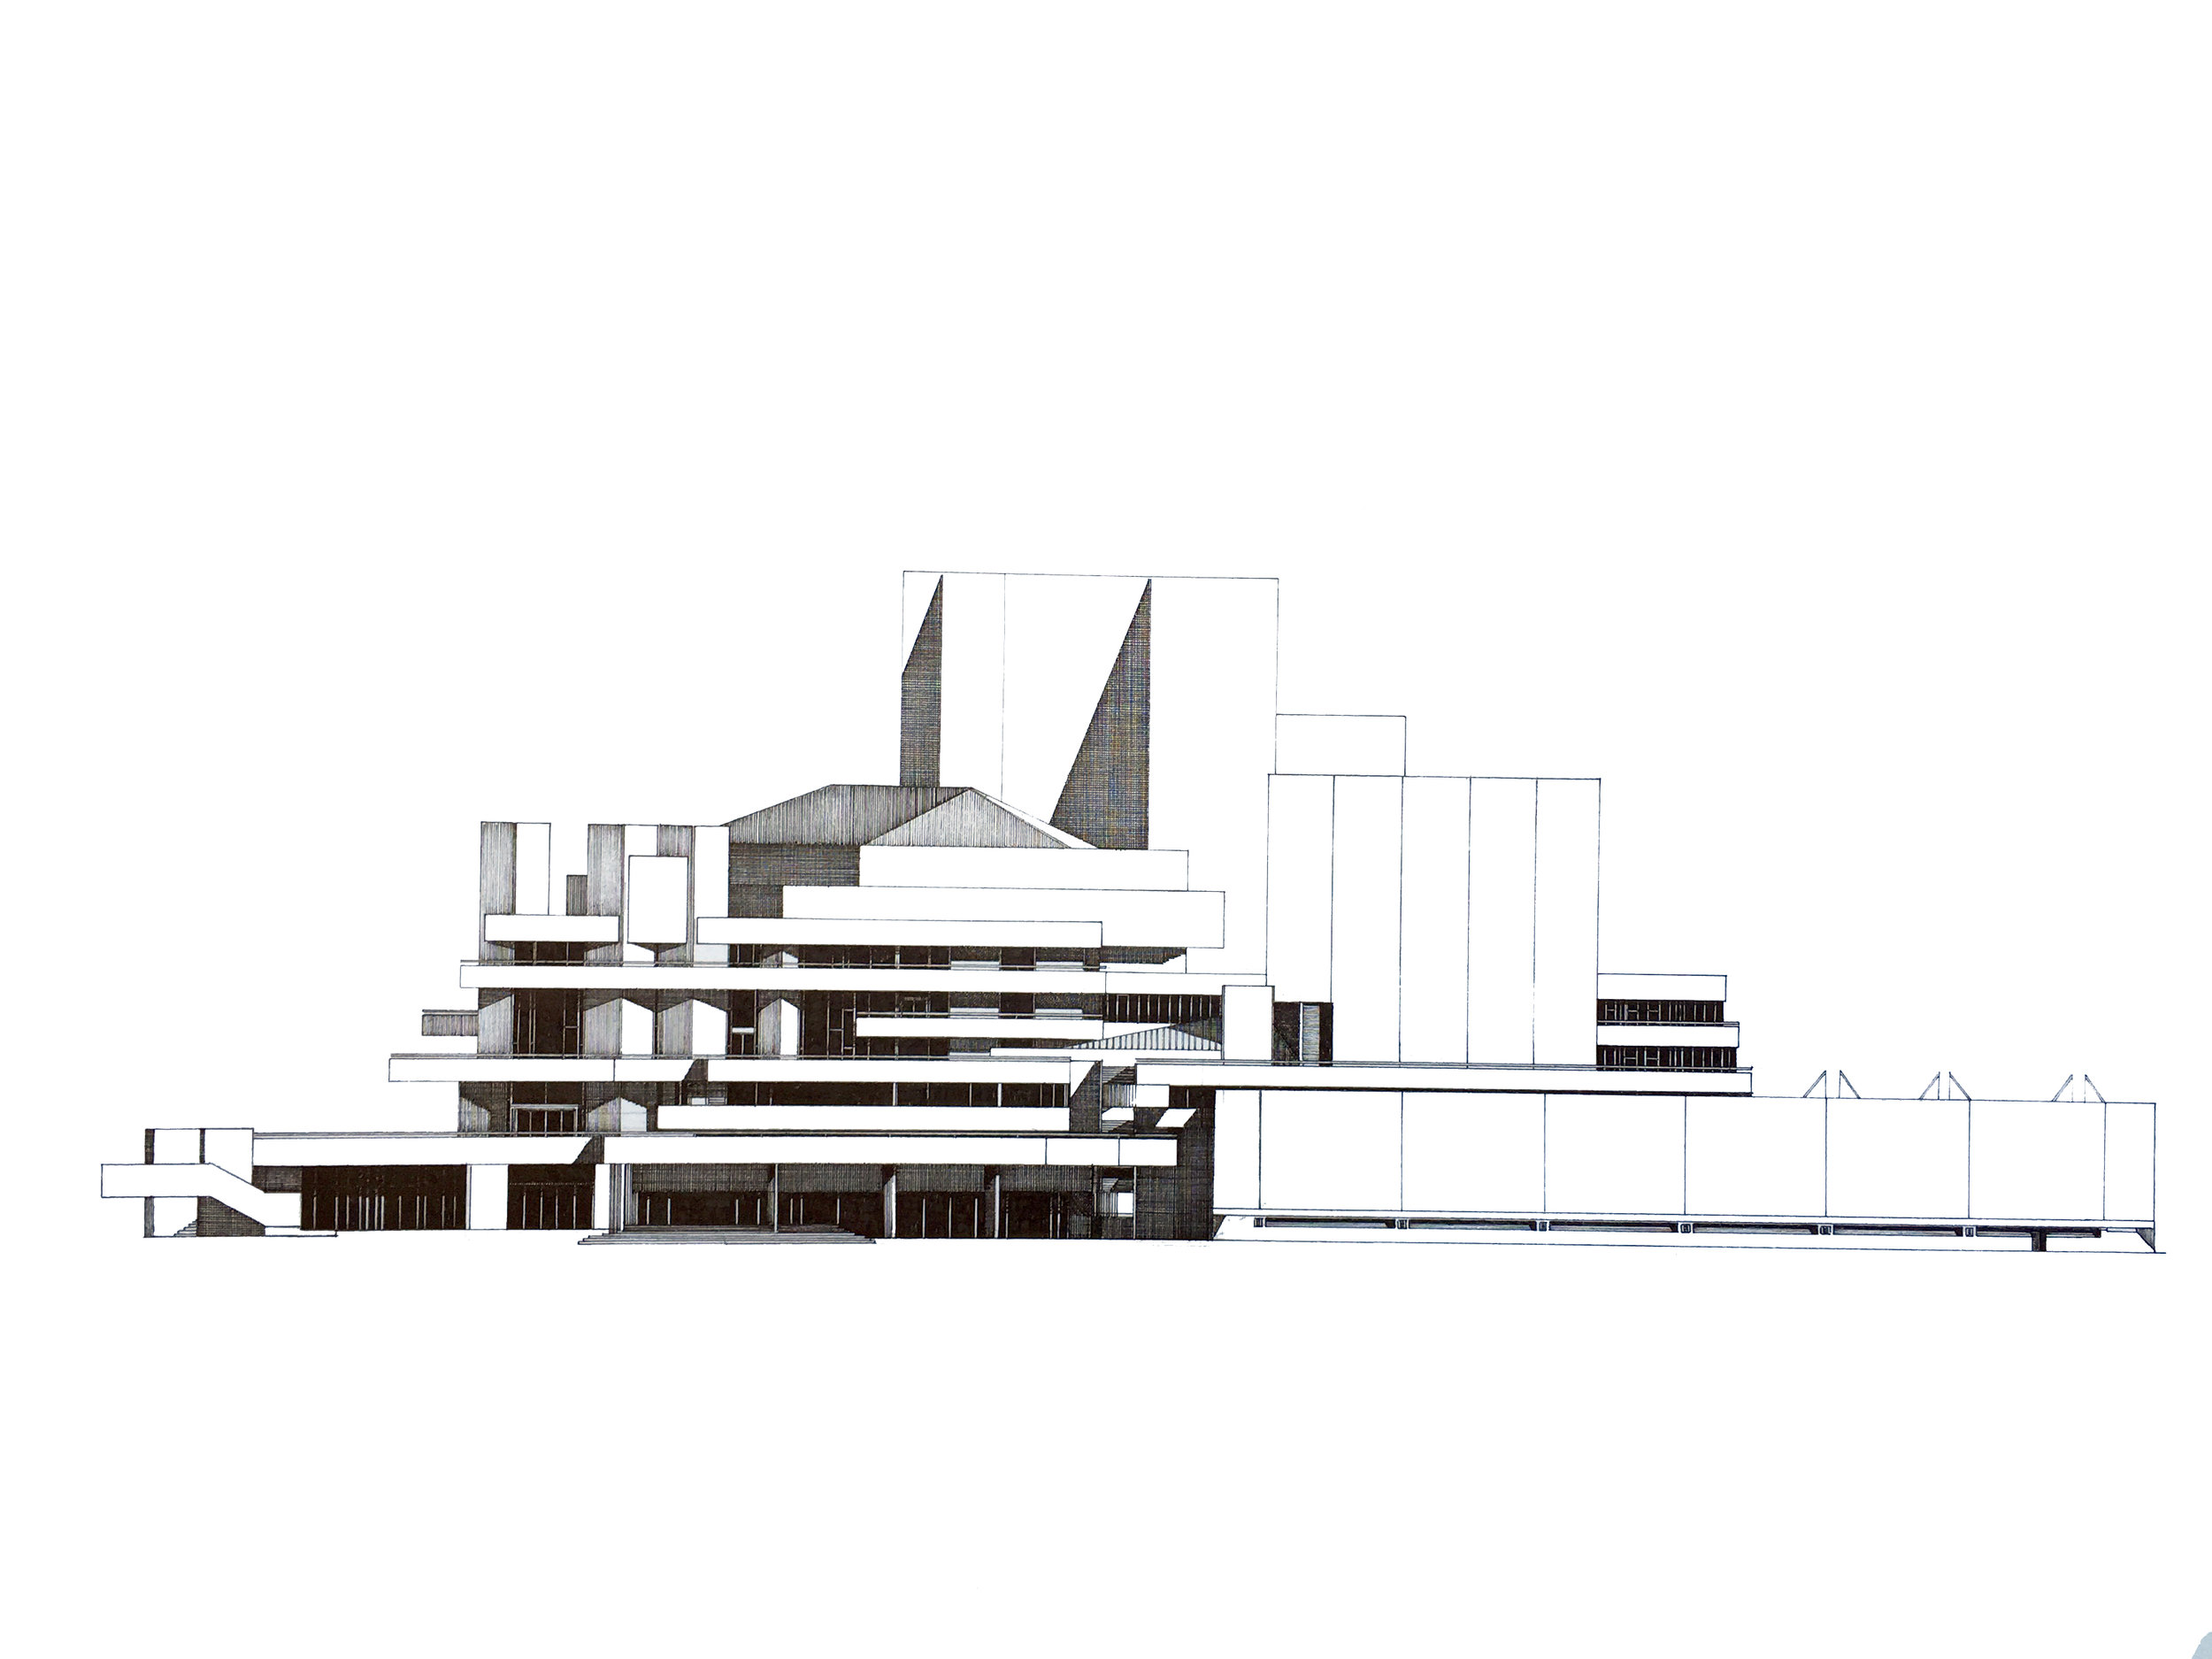  National Theatre. London  West Elevation 